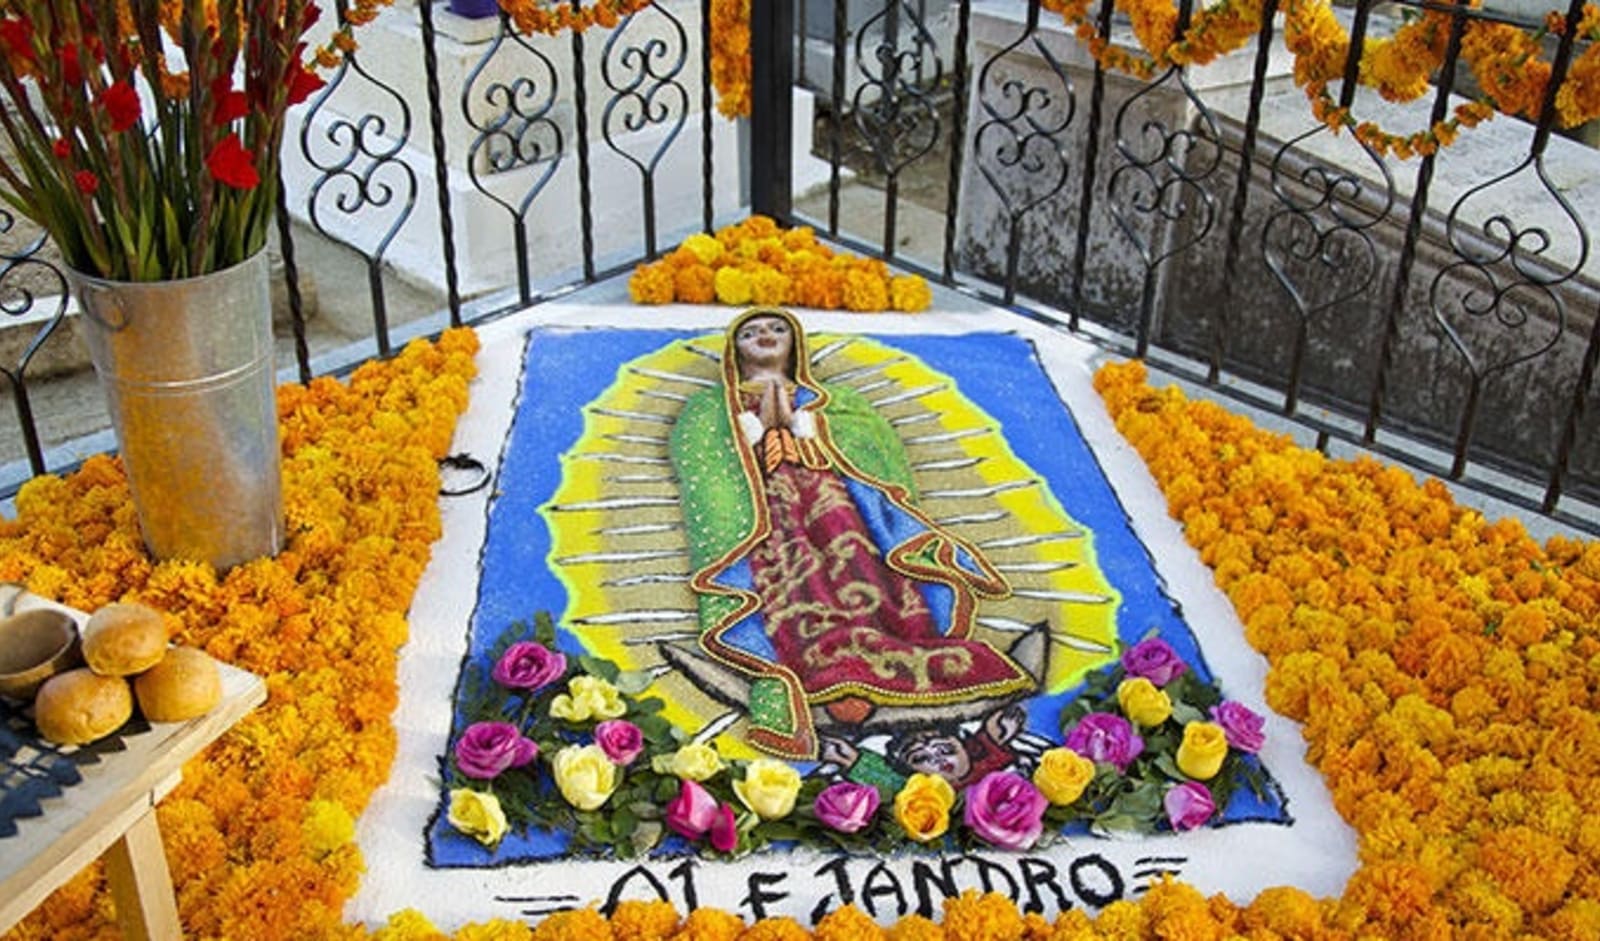 decorated-alter-mexico-ps.jpg